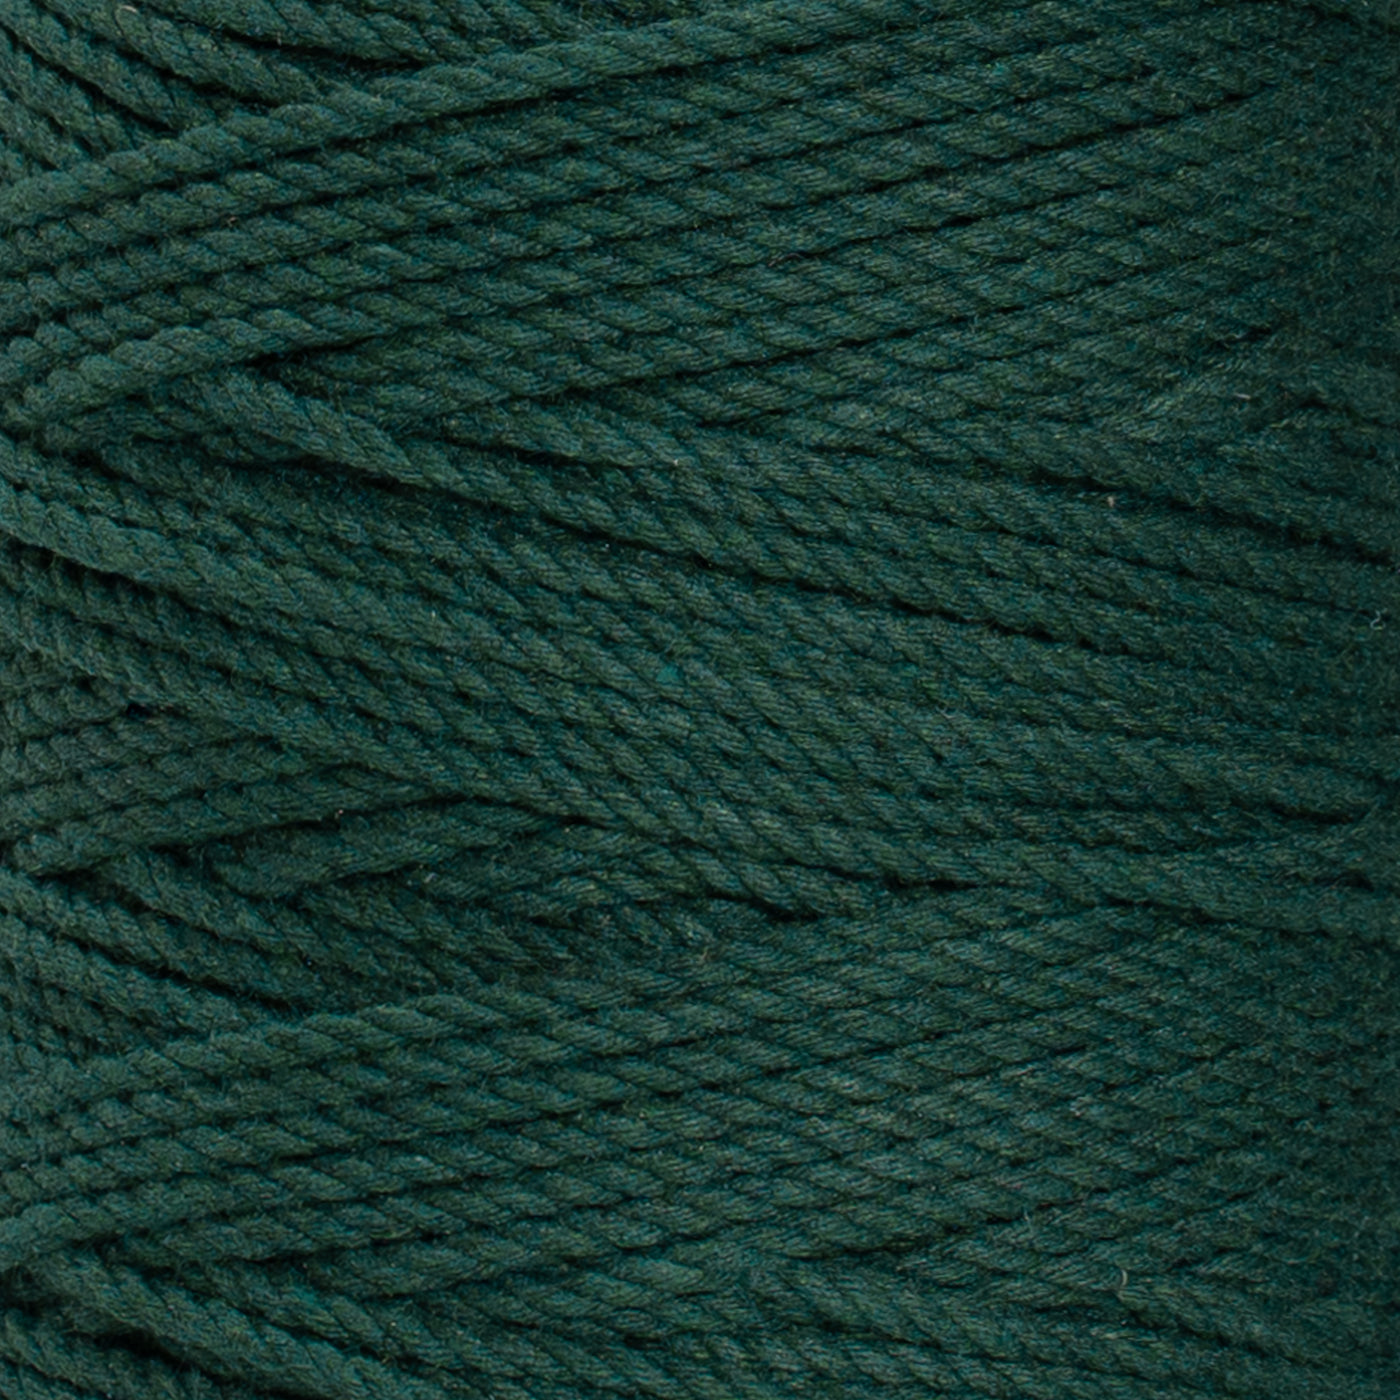 COTTON ROPE ZERO WASTE 2 MM - 3 PLY - FOREST GREEN COLOR